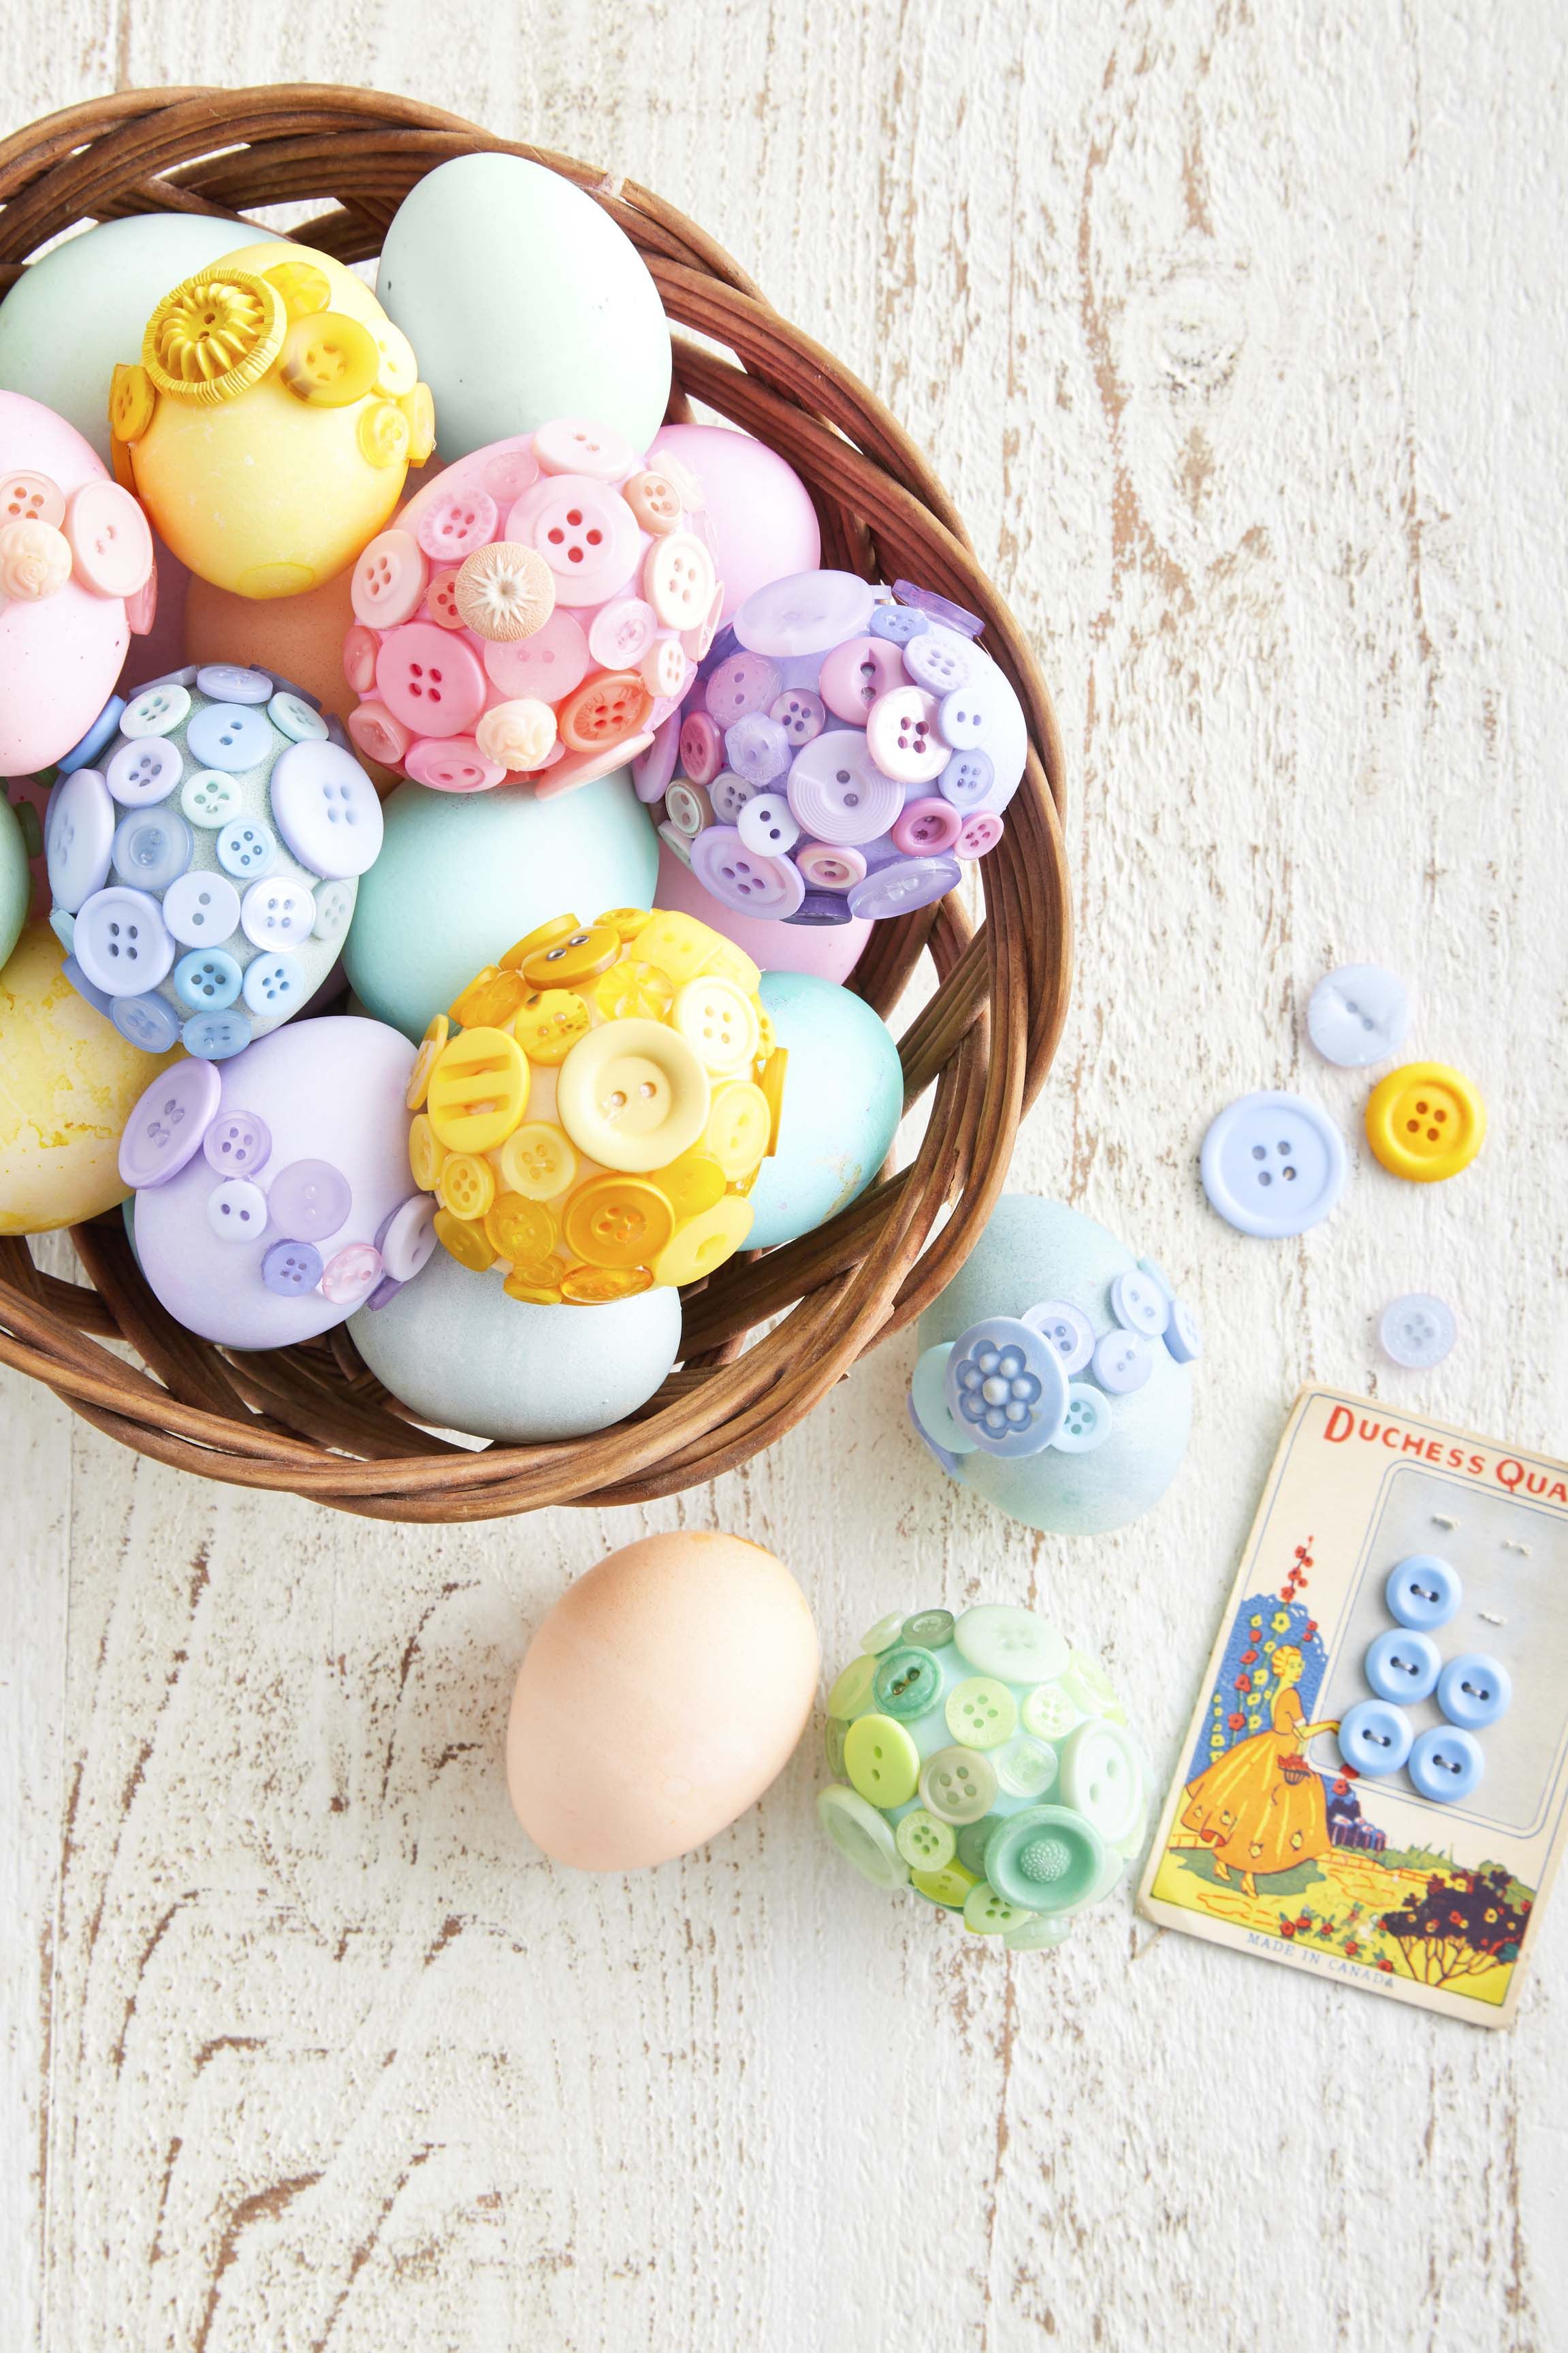 59 DIY Easter Decorations - Ideas for Easter DIY Decorations & Gifts